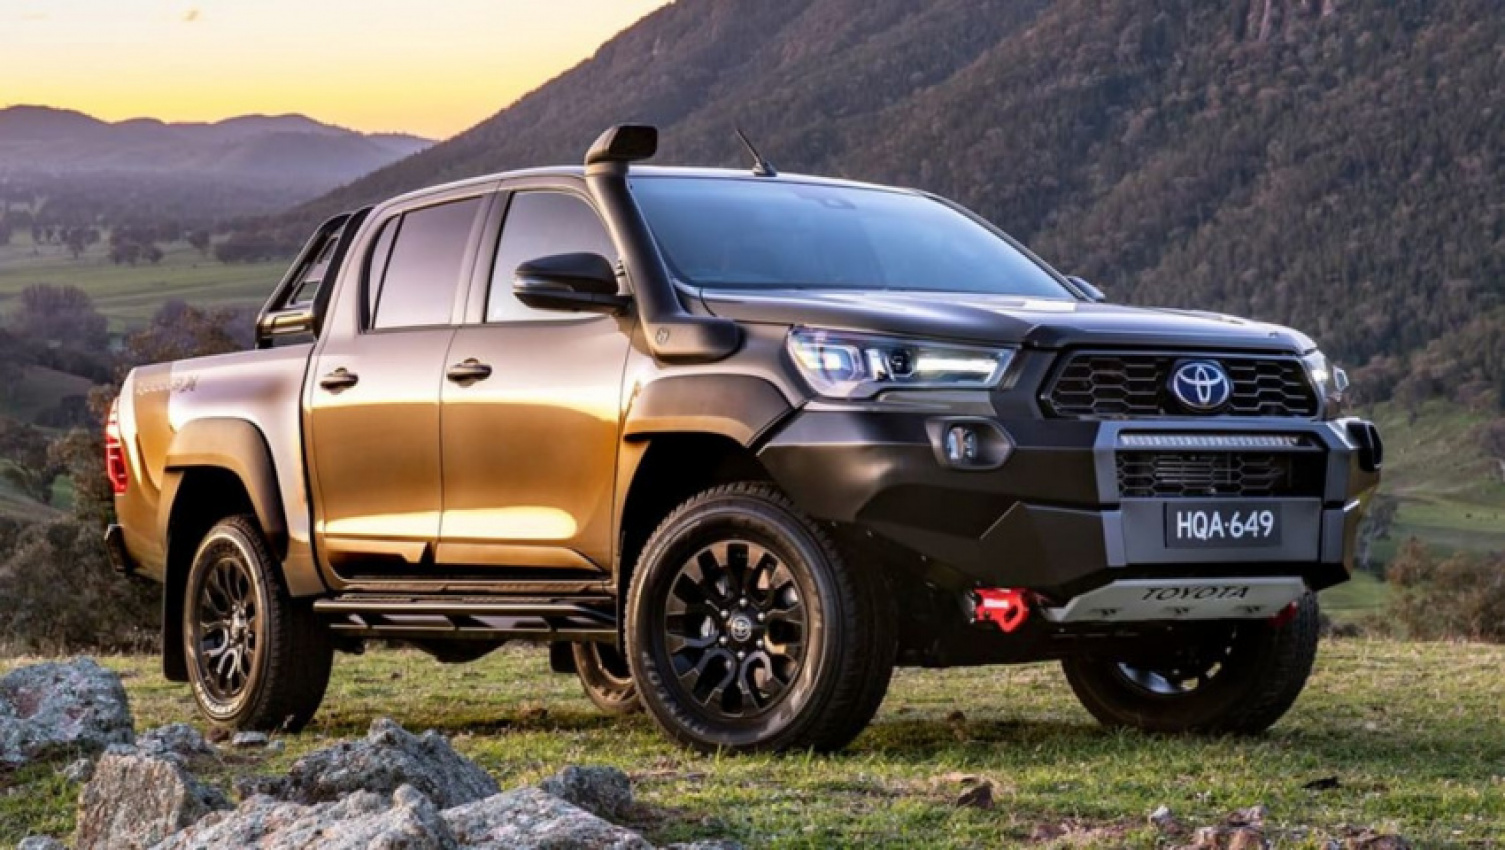 autos, cars, ford, isuzu, mitsubishi, toyota, commercial, ford commercial range, ford news, ford ranger, ford ranger 2022, ford ute range, industry news, isuzu commercial range, isuzu d-max, isuzu d-max 2022, isuzu news, isuzu ute range, mazda bt-50, mazda bt-50 2022, mazda commercial range, mazda news, mazda ute range, mitsubishi commercial range, mitsubishi news, mitsubishi triton, mitsubishi triton 2022, mitsubishi ute range, nissan commercial range, nissan navara, nissan navara 2022, nissan news, nissan ute range, showroom news, toyota commercial range, toyota hilux, toyota hilux 2022, toyota news, toyota ute range, volkswagen, volkswagen amarok, volkswagen amarok 2022, volkswagen commercial range, volkswagen news, volkswagen ute range, is australia the biggest market for ford ranger, toyota hilux, isuzu d-max, mitsubishi triton and more? we reveal where we rank for global ute sales